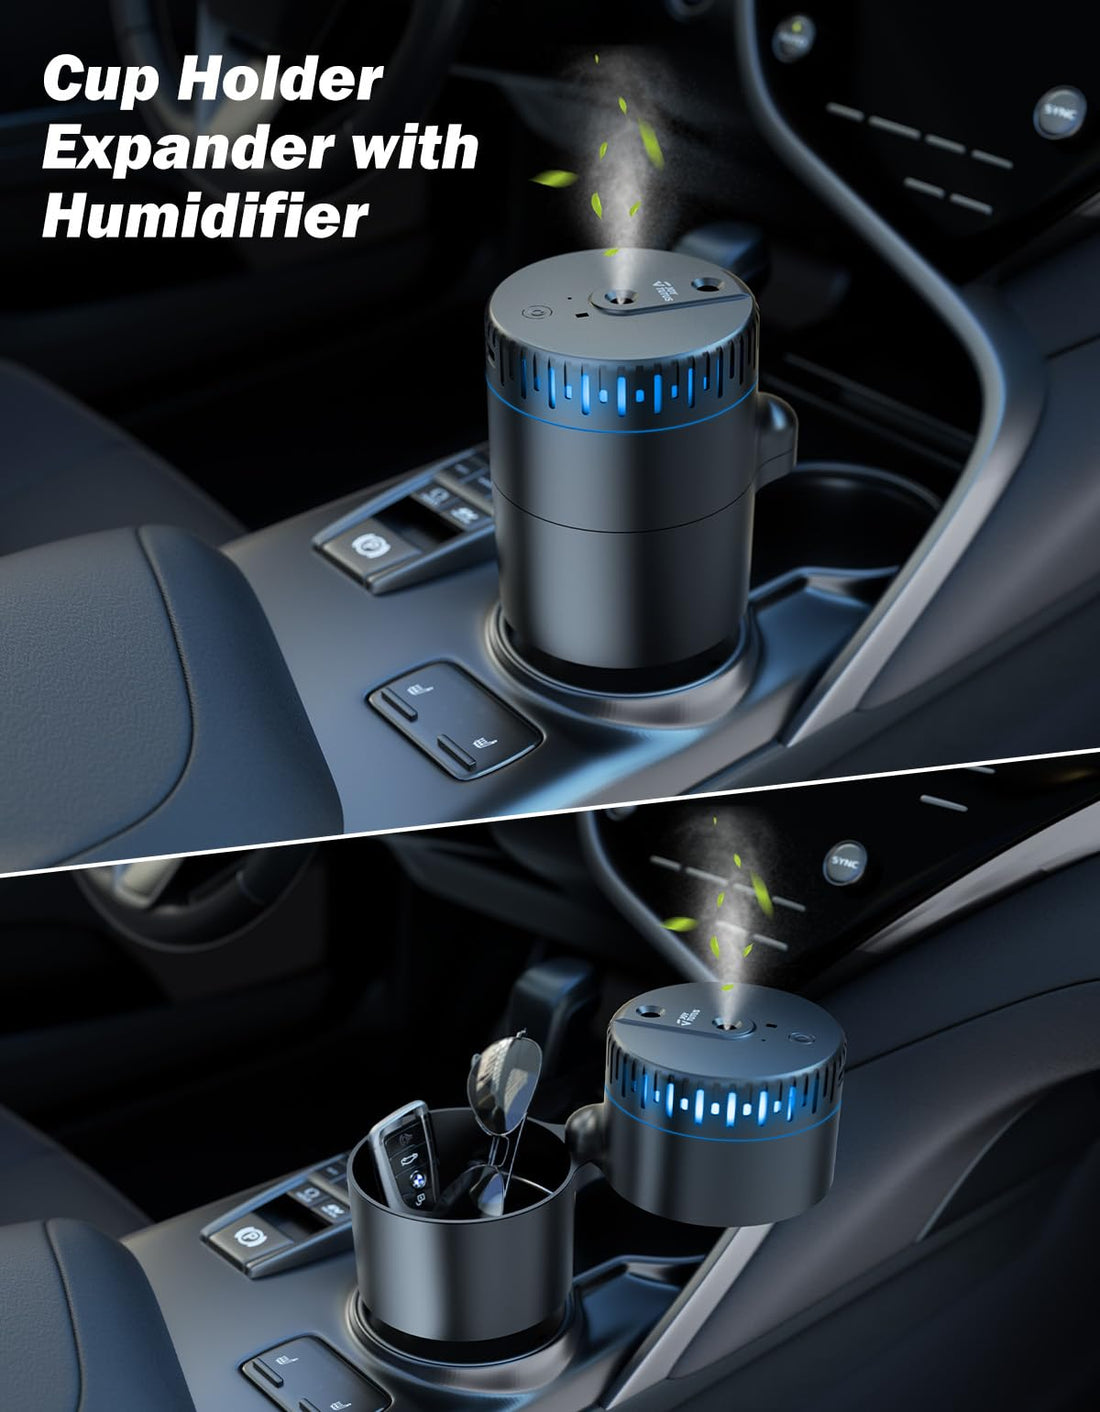 JOYTUTUS Car Cup Holder Expander with Humidifier, Car Air Freshener Diffuser with 2 Independent Nozzles